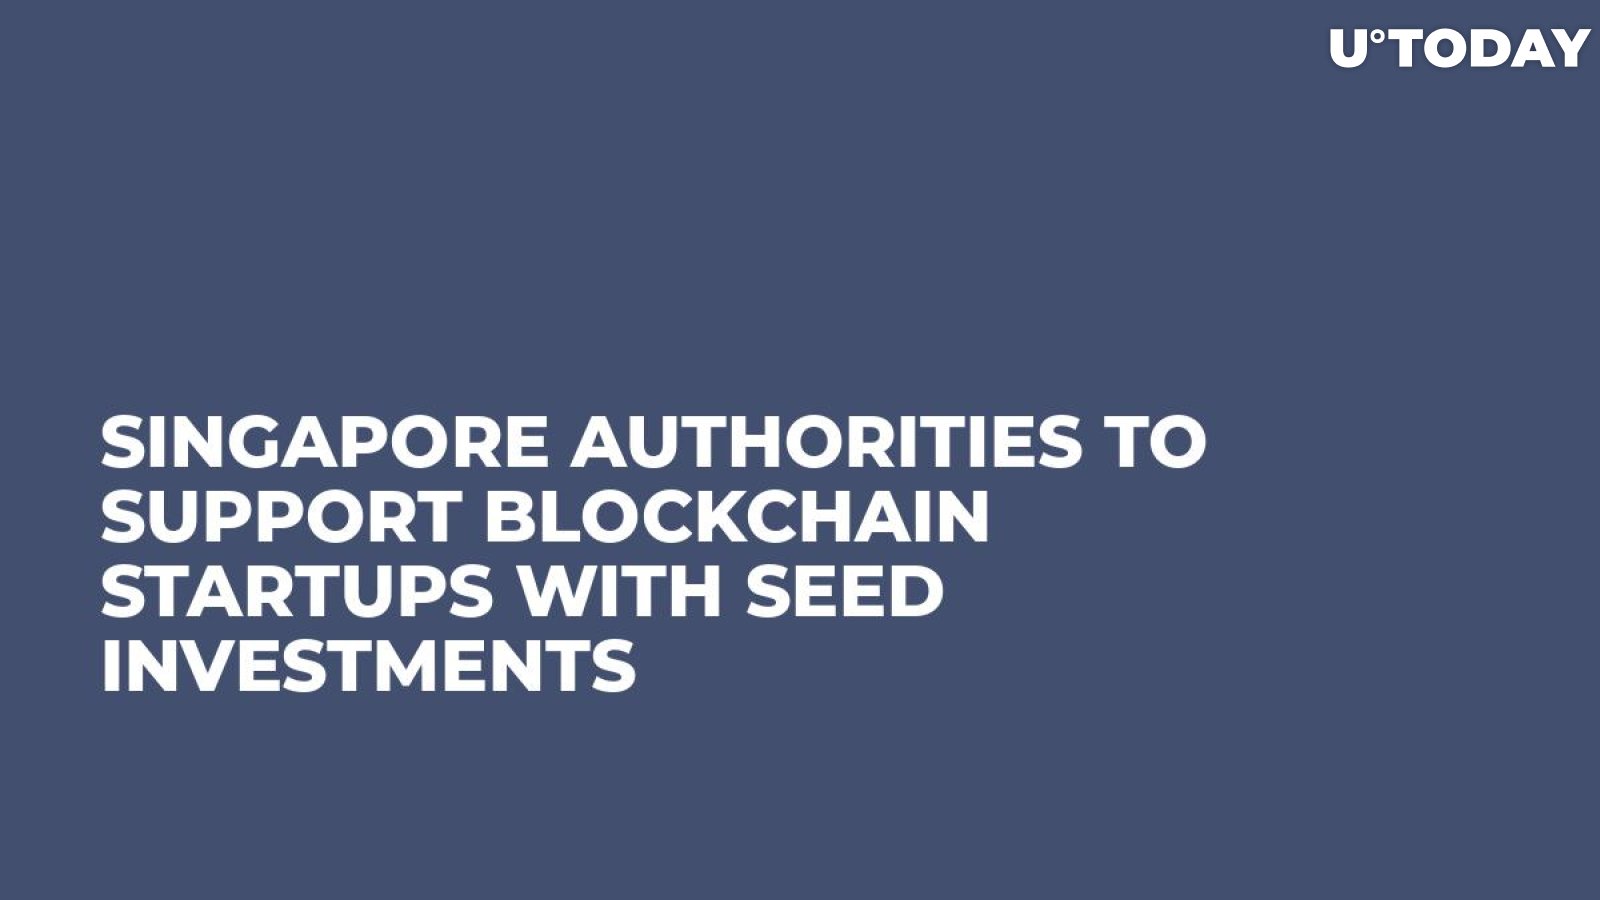 Singapore Authorities to Support Blockchain Startups with Seed Investments